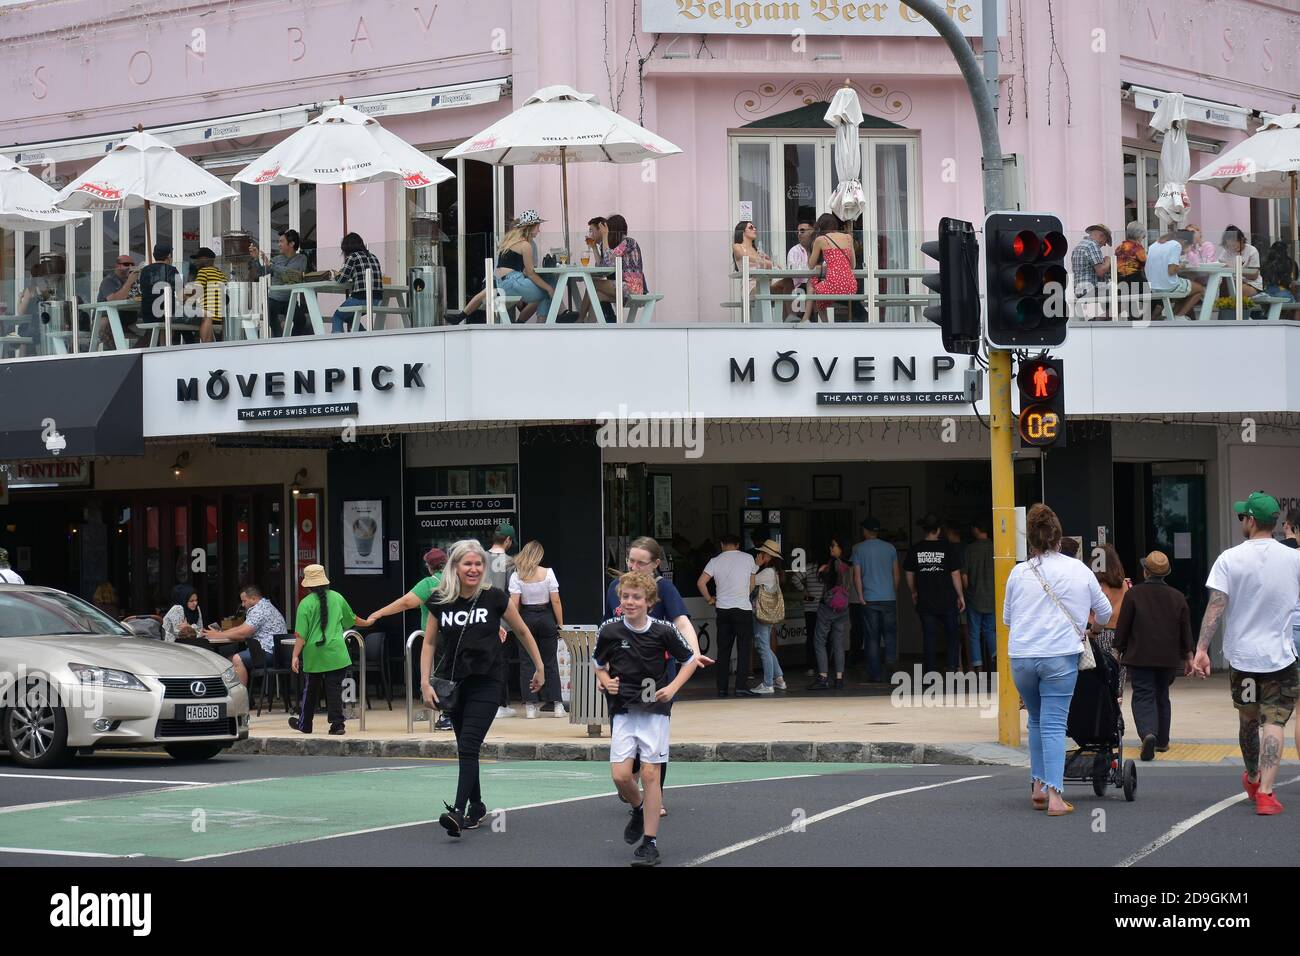 Auckland New Zealand Nov 01 2020 View Of People Crossing Road In Front Of Movenpick Ice Cream Cafe In Mission Bay Stock Photo Alamy